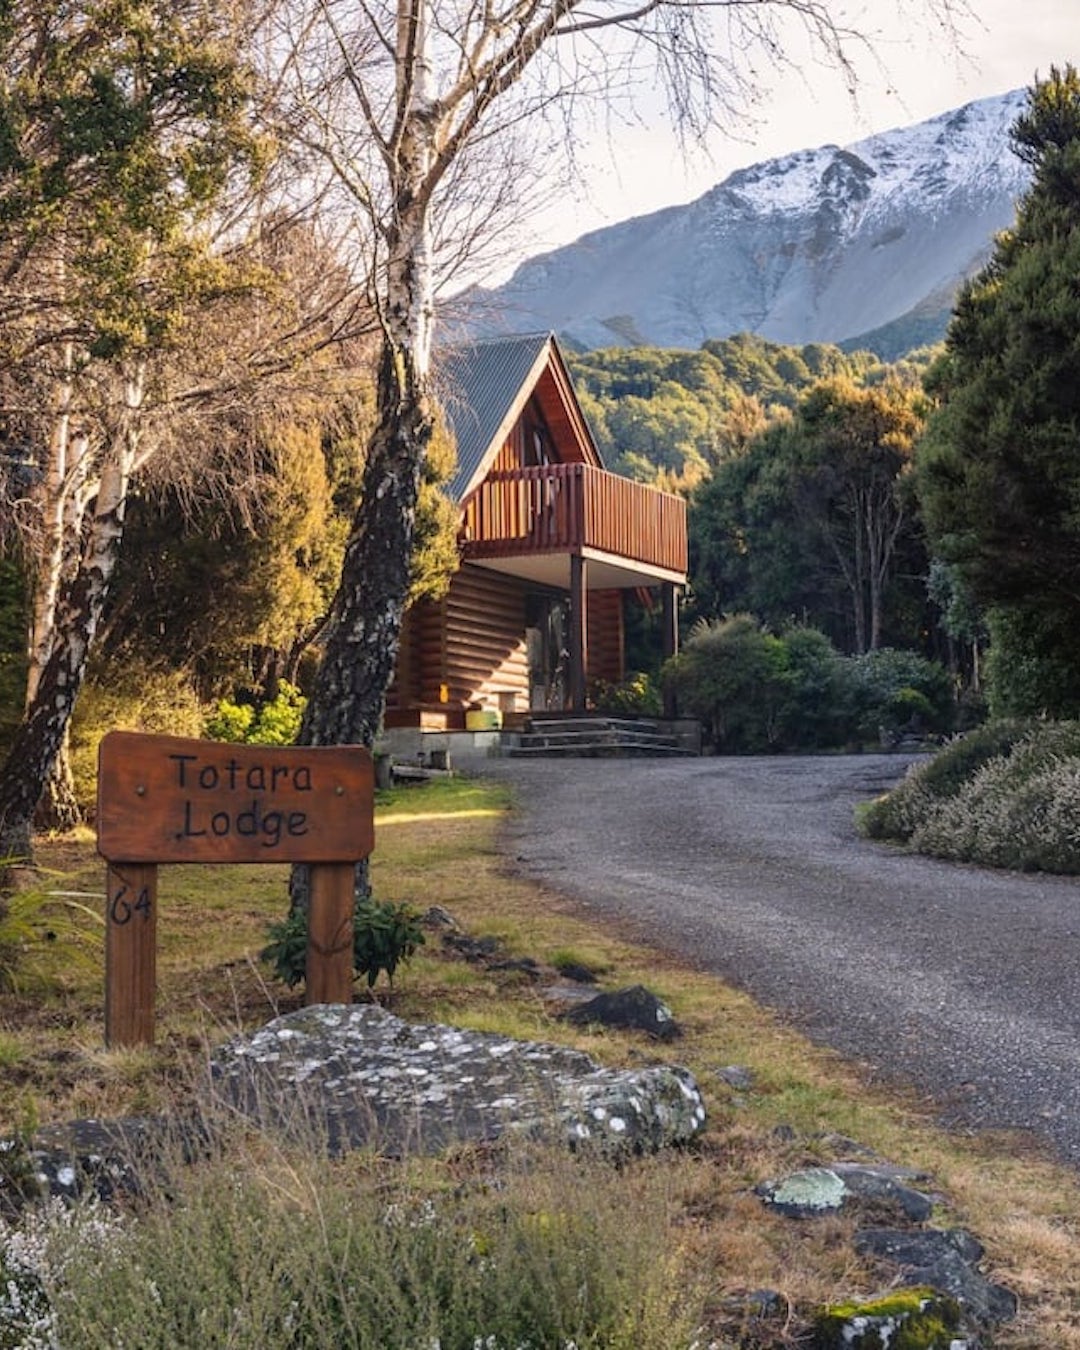 Totara Lodge is shown from the outside with a sign pointing to it.